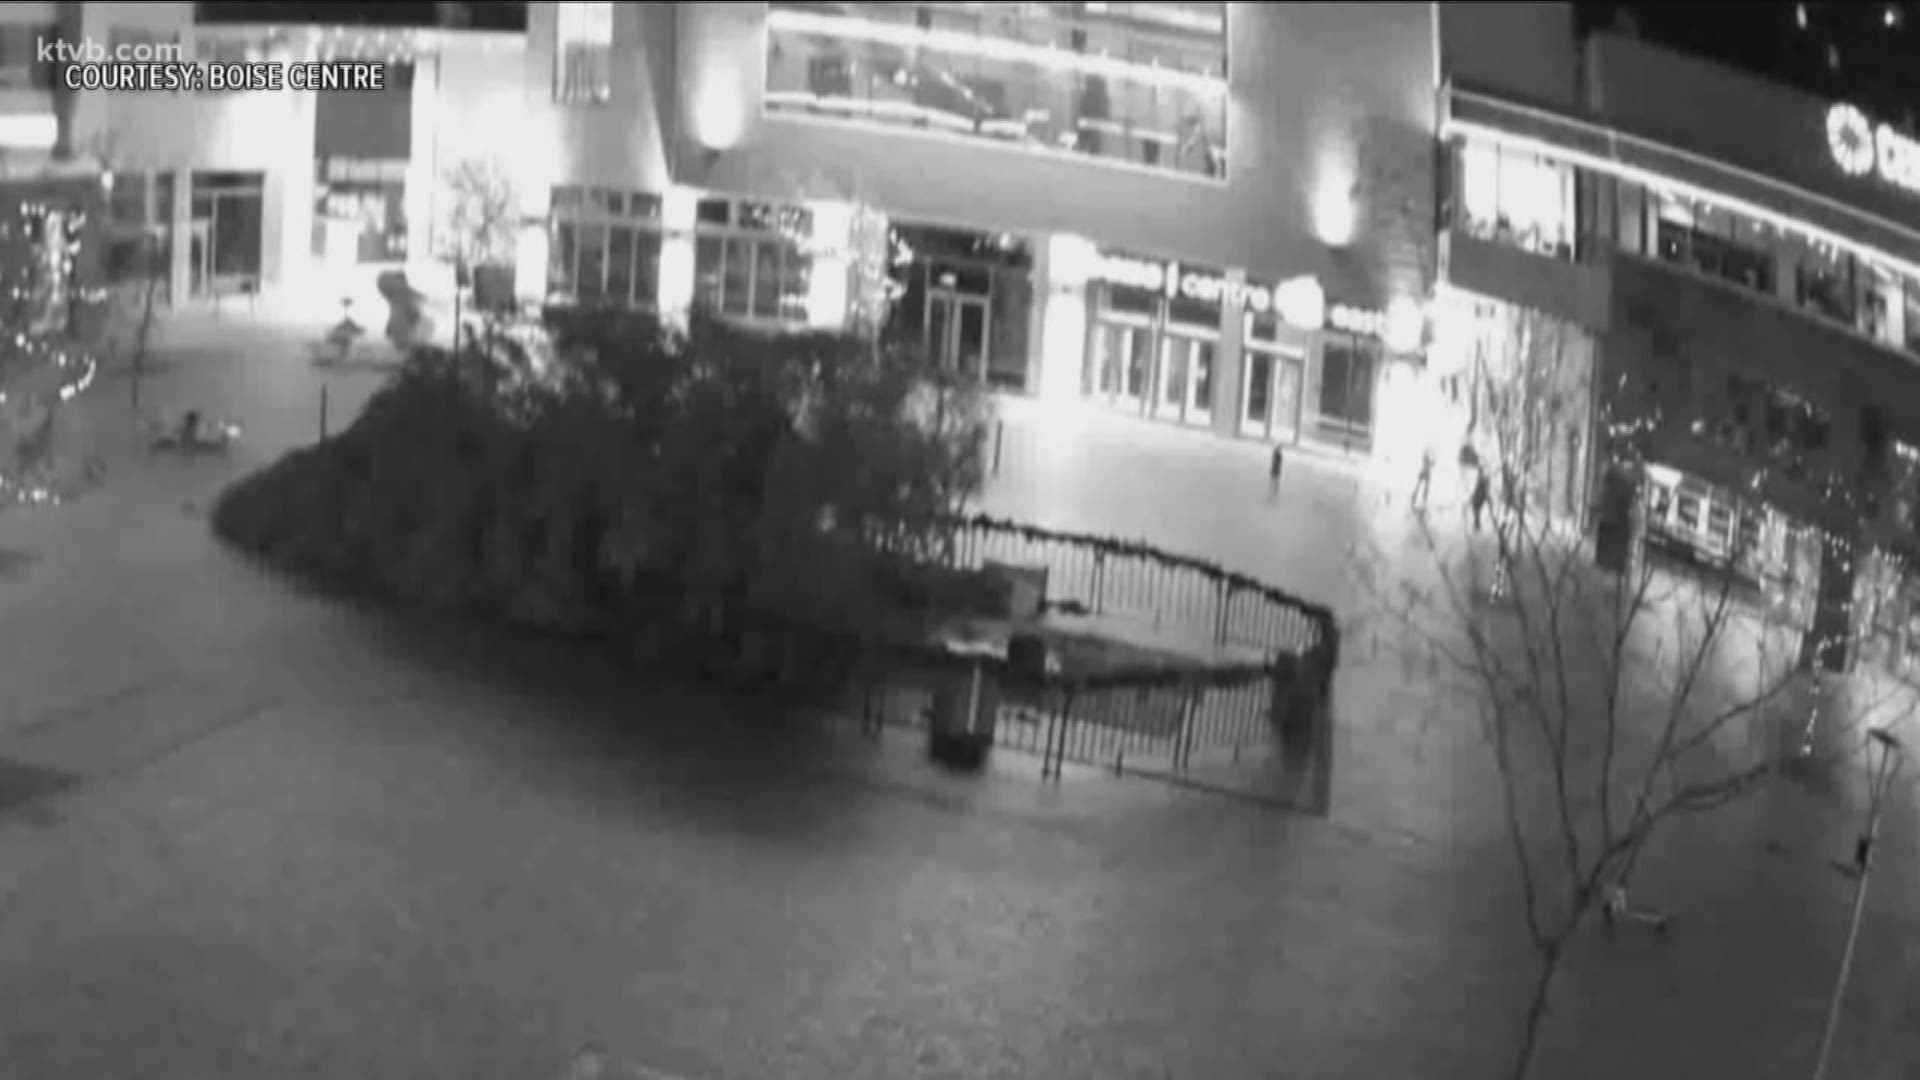 We now have video of the tree falling over.